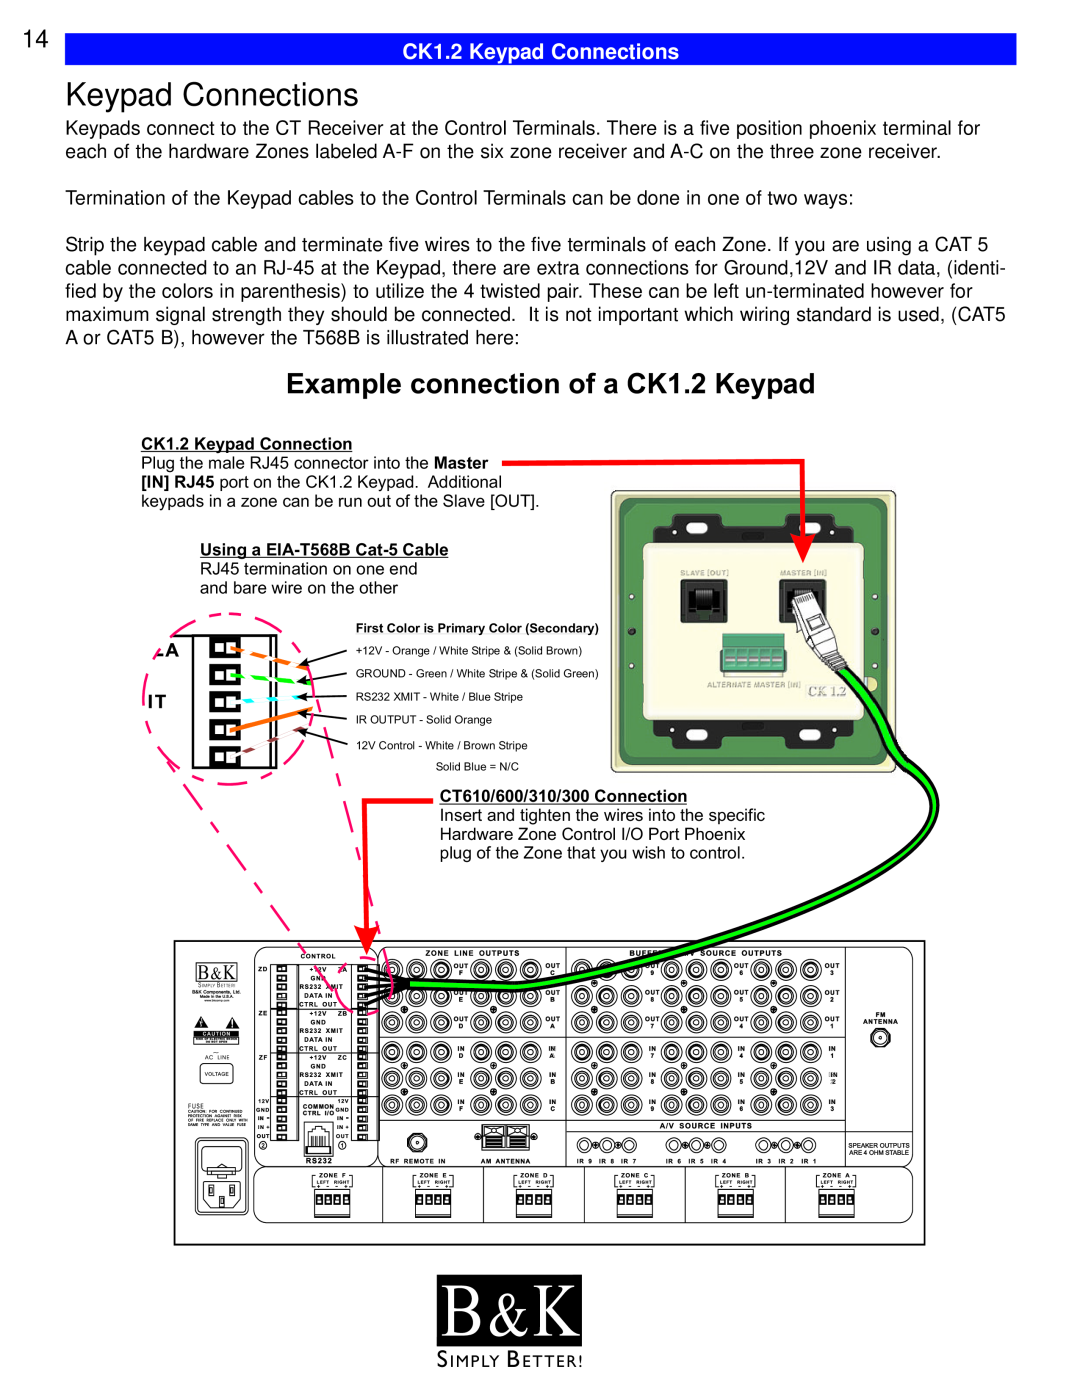 B&K CT610, CT600, CT602, CT310, CT300 user manual B & K, Example connection of a CK1.2 Keypad, CK1.2 Keypad Connections 